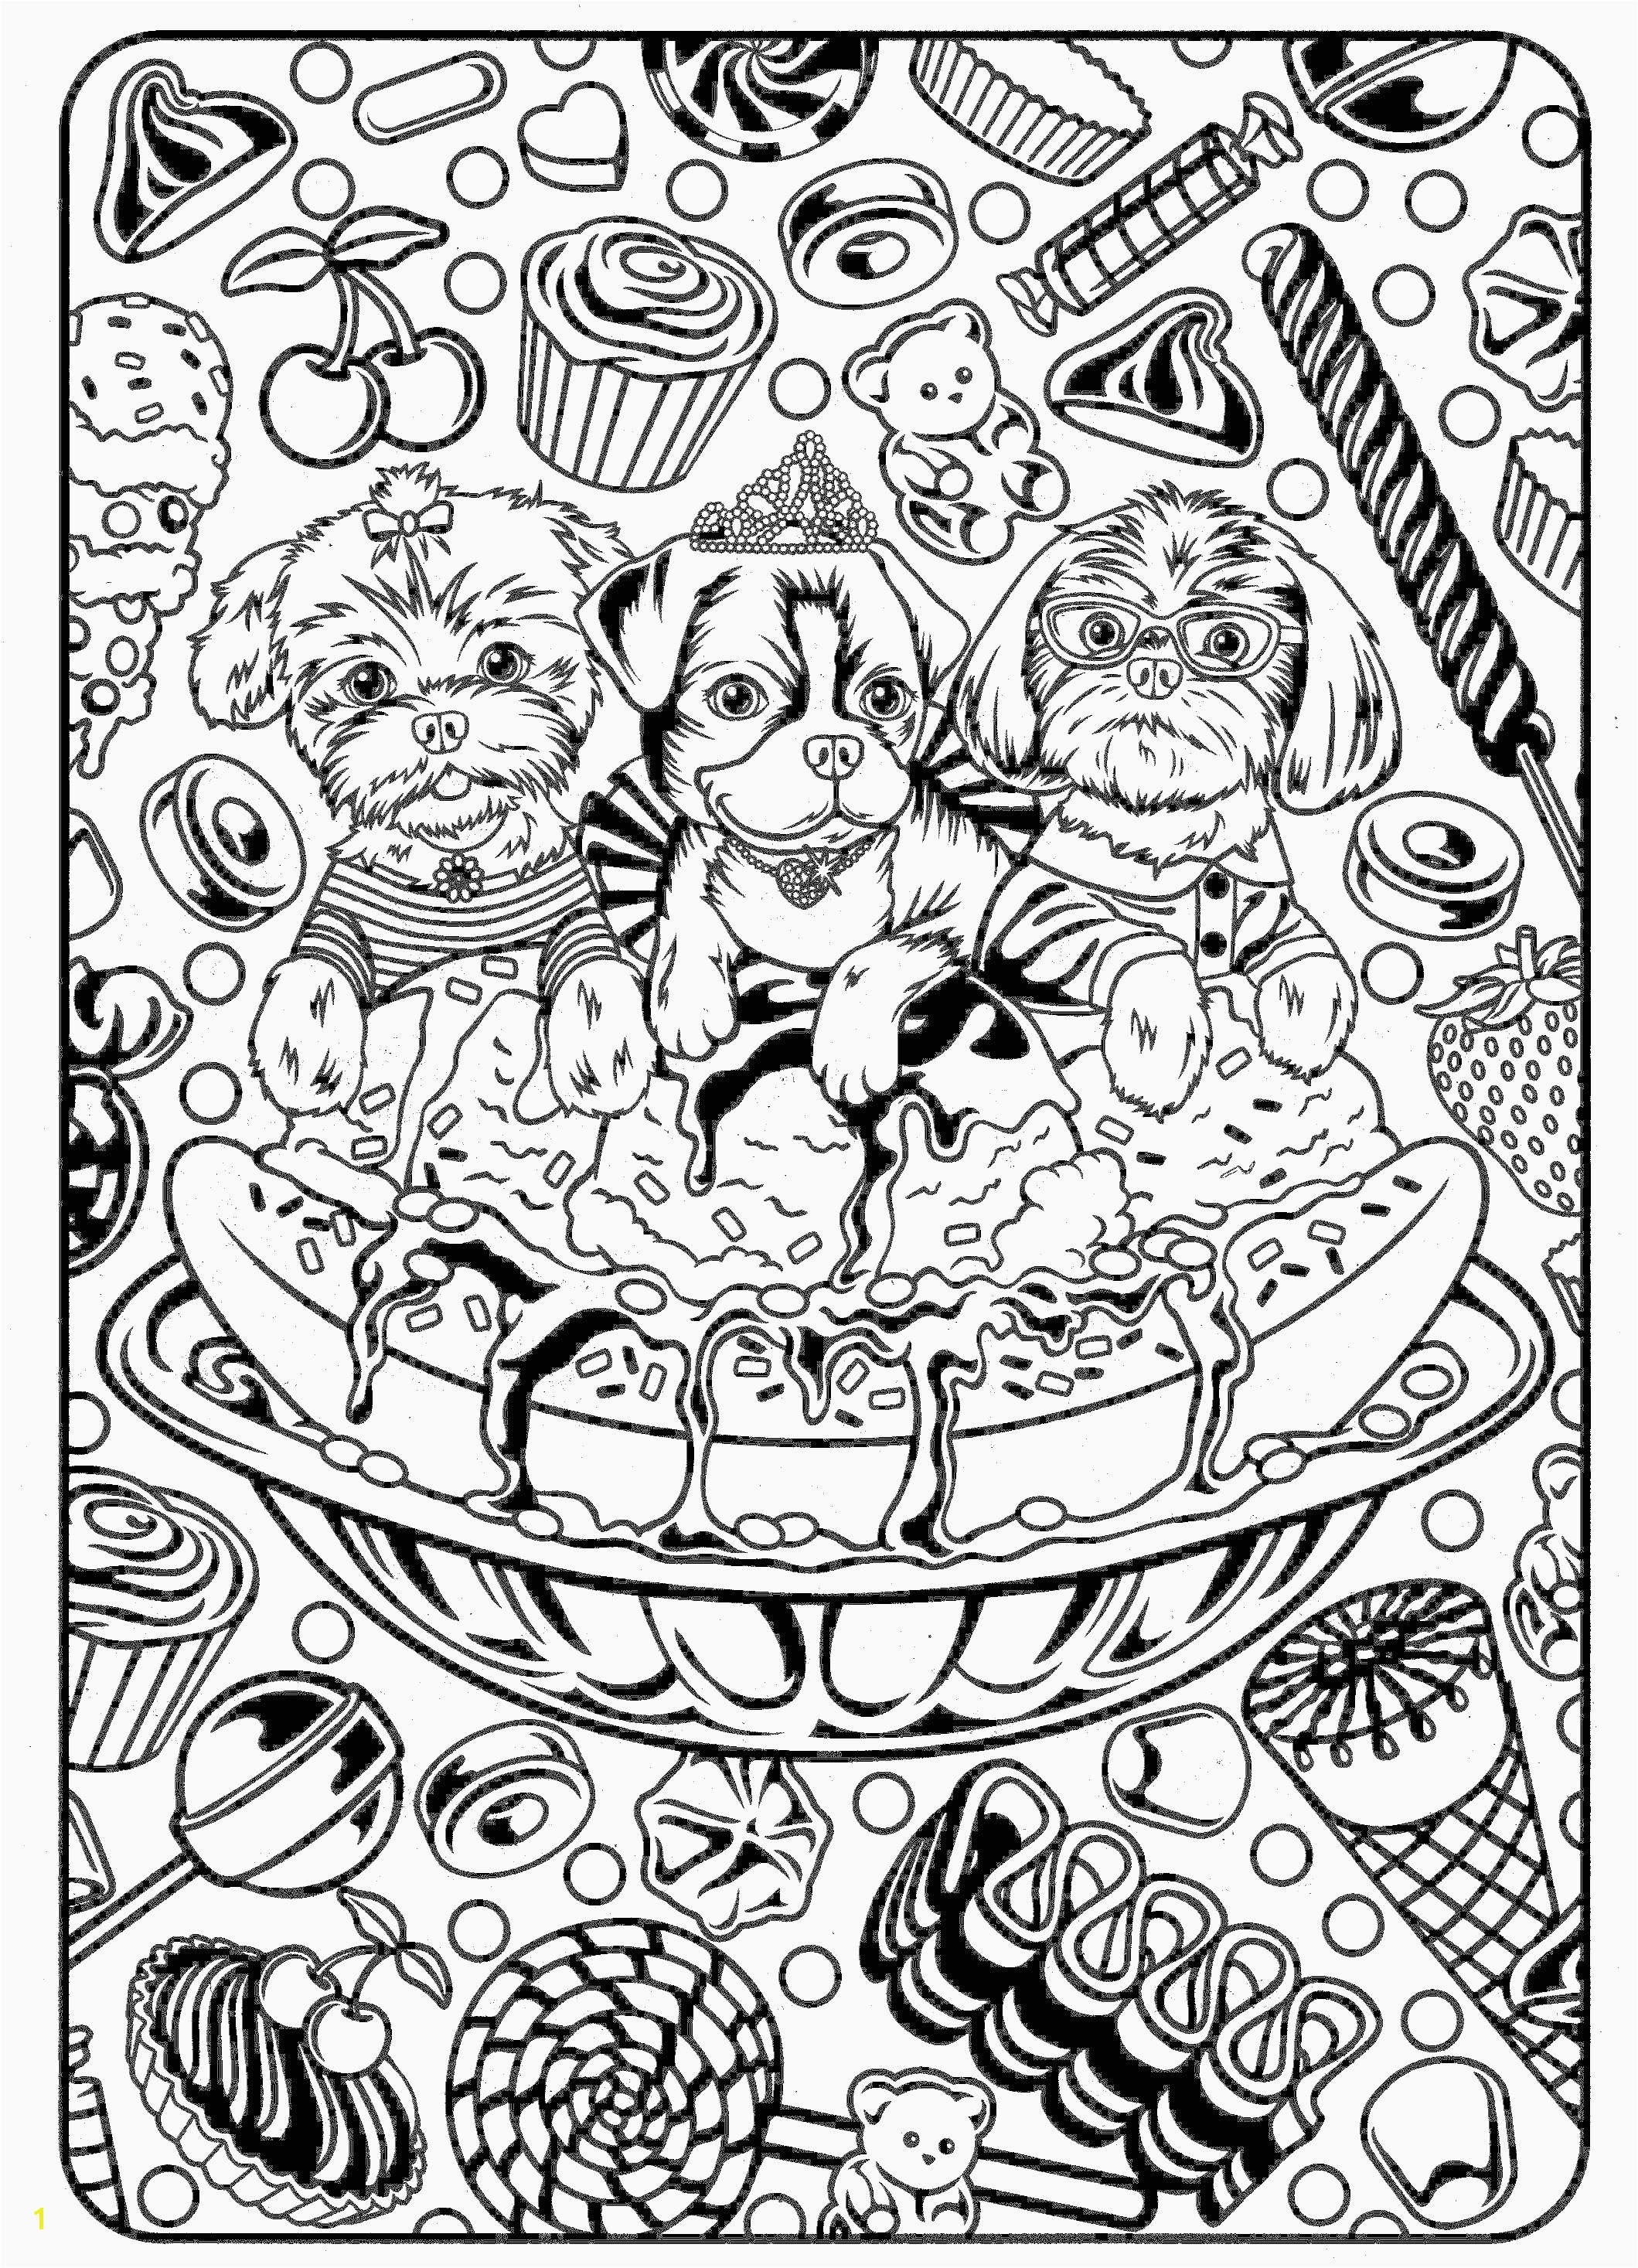 Free Coloring Book Pages to Print Awesome Free Coloring Book Pages to Print